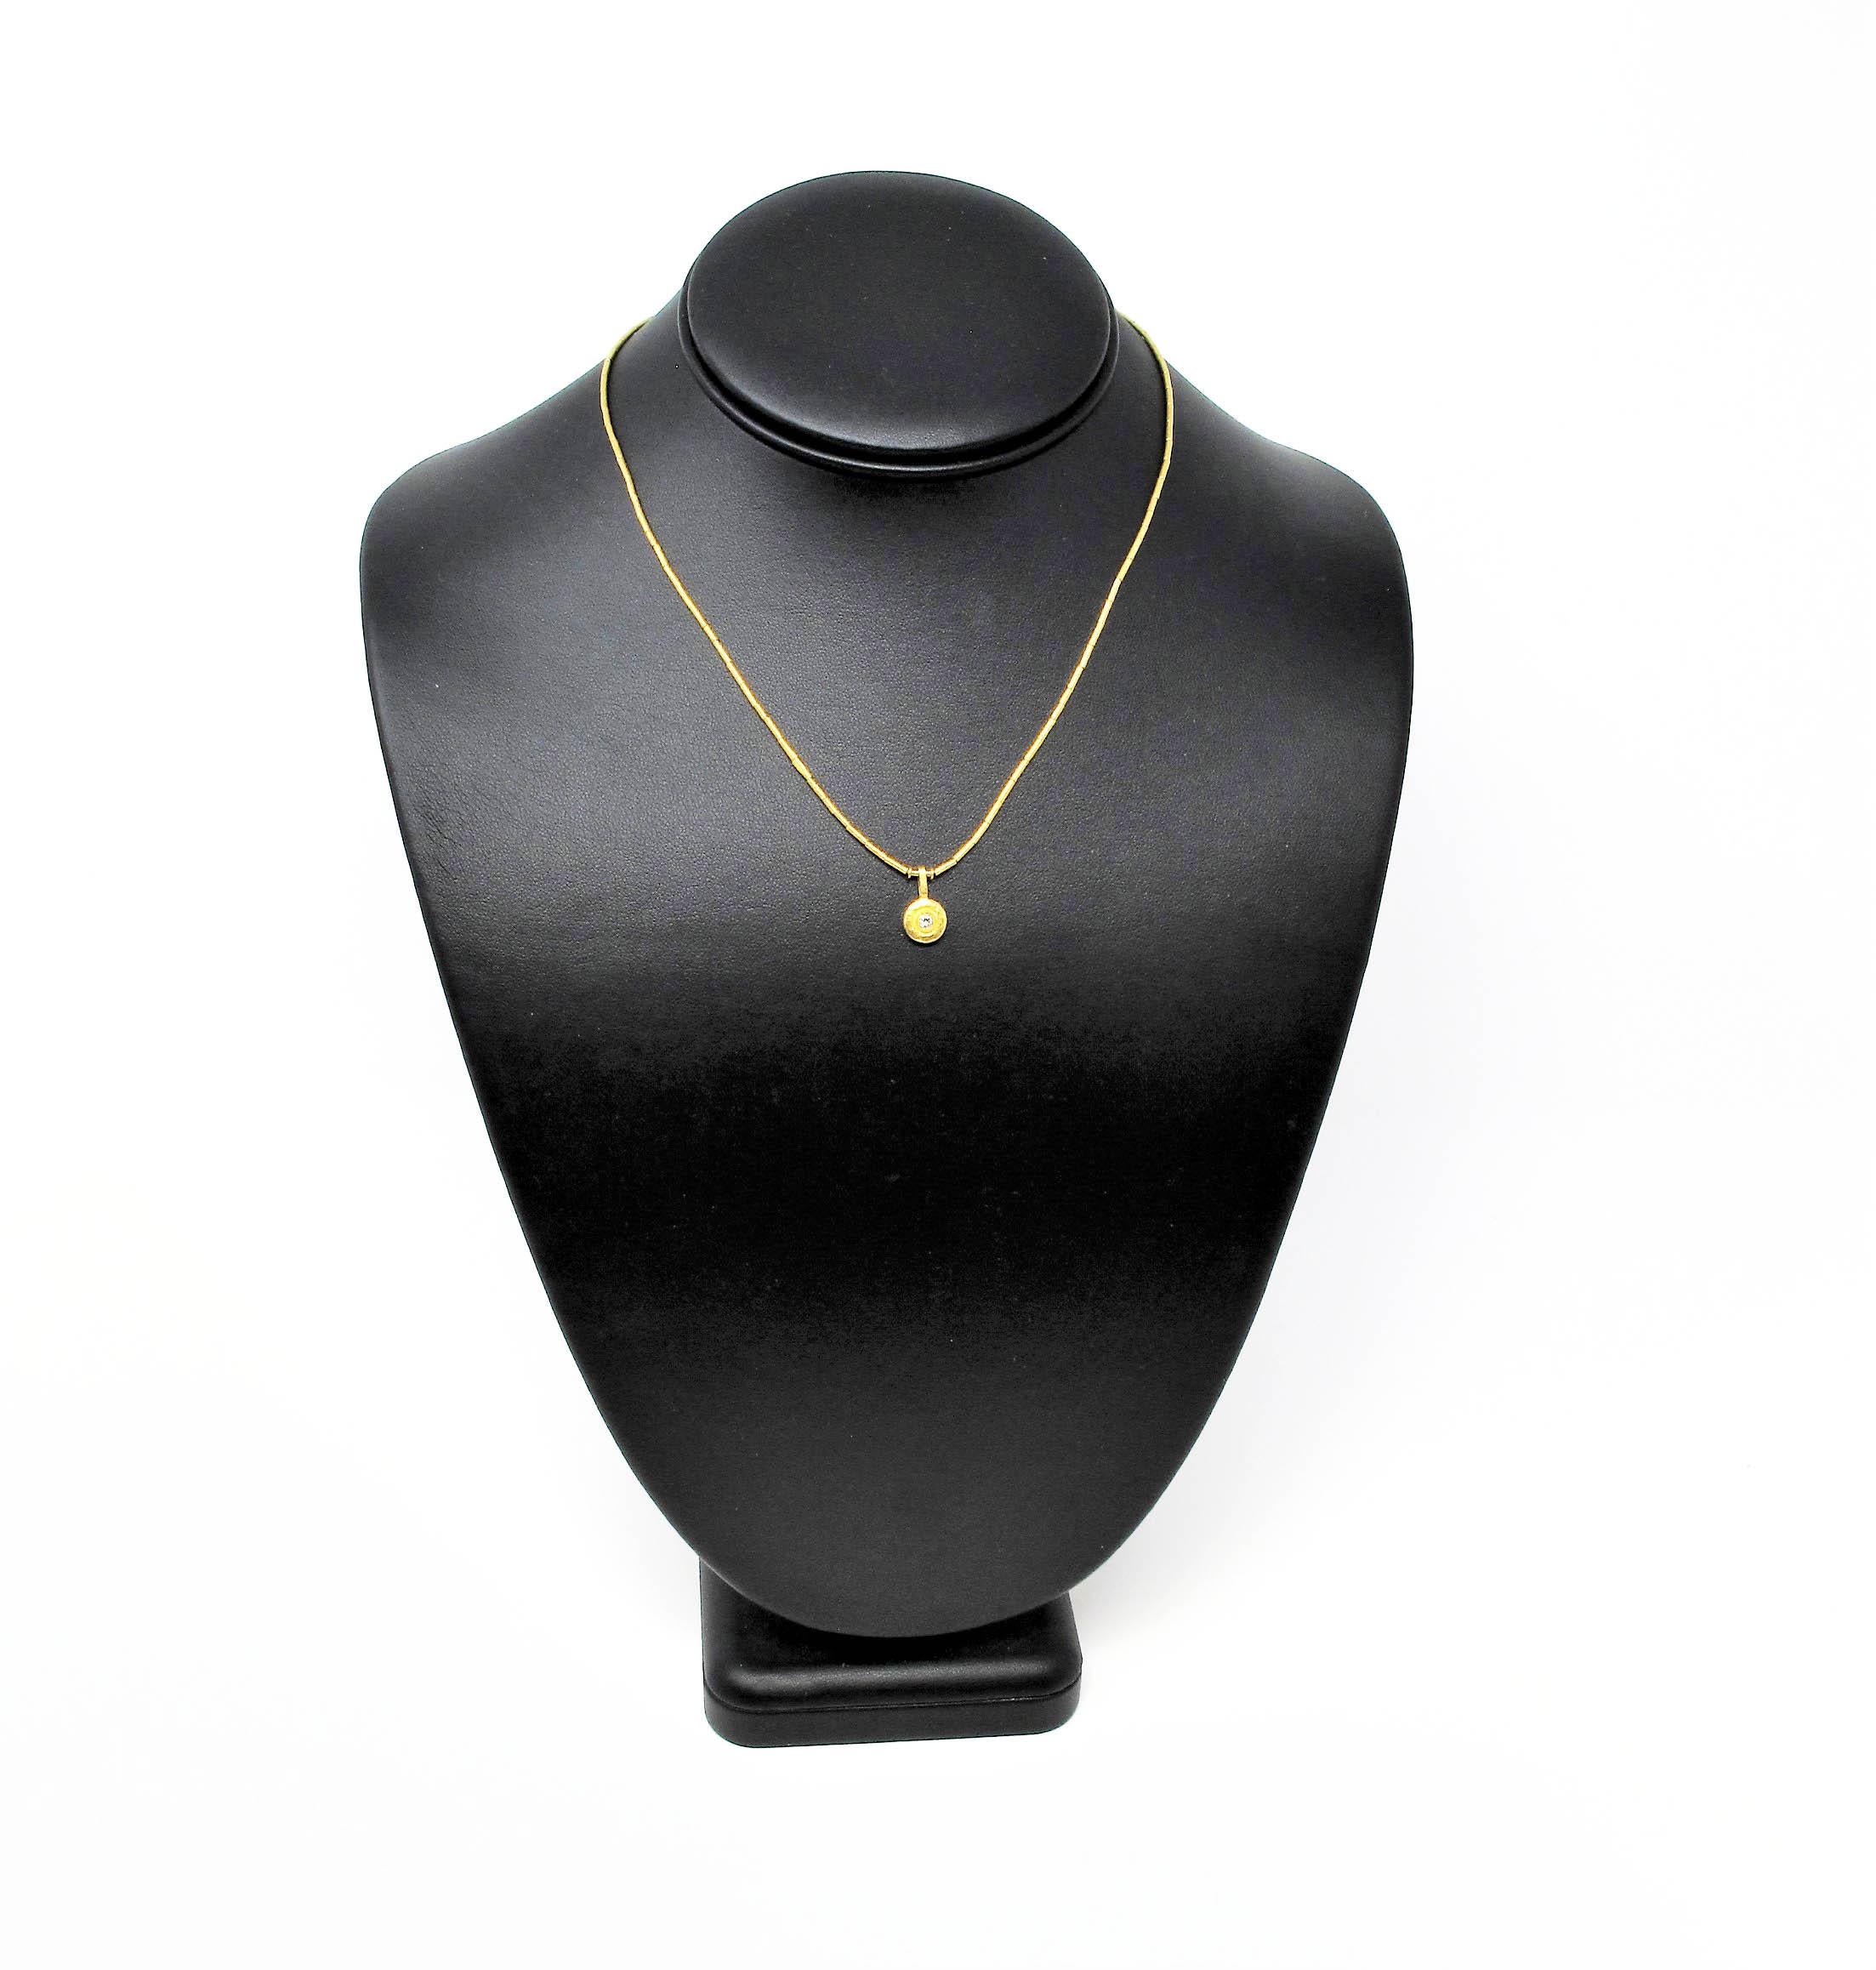 We are absolutely in love with this delicate, yet sleek handmade diamond pendant necklace by acclaimed jeweler, Gurhan. The incredible luxury craftsmanship that Gurhan is known for is brought to life in this stunning modern design. 

This gorgeous